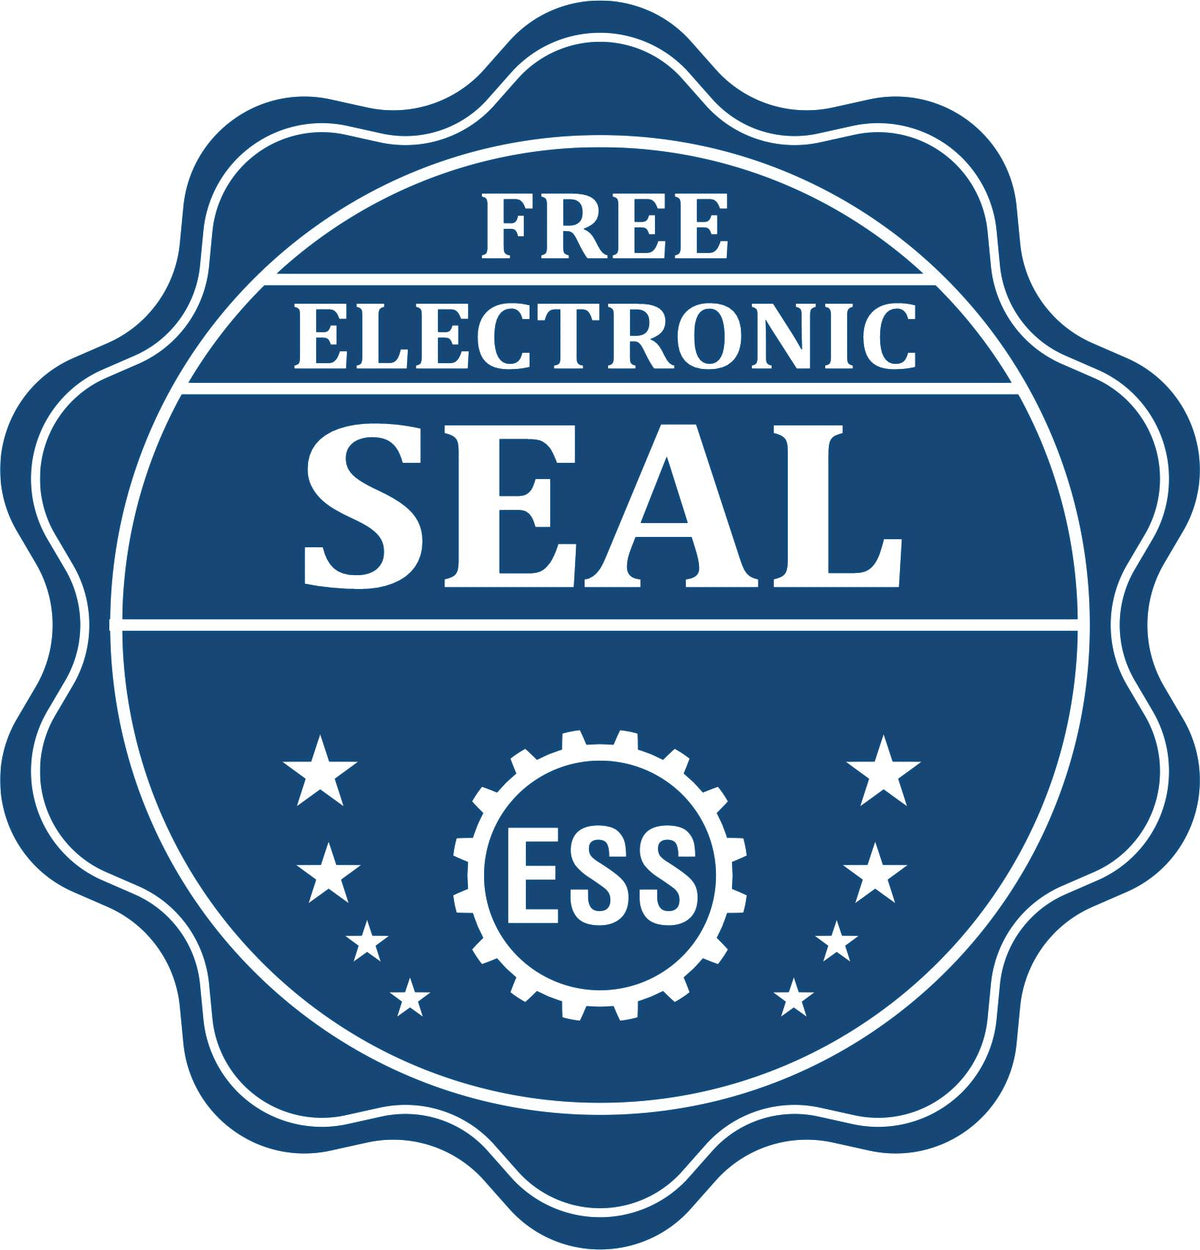 A badge showing a free electronic seal for the Premium MaxLight Pre-Inked Tennessee Landscape Architectural Stamp with stars and the ESS gear on the emblem.